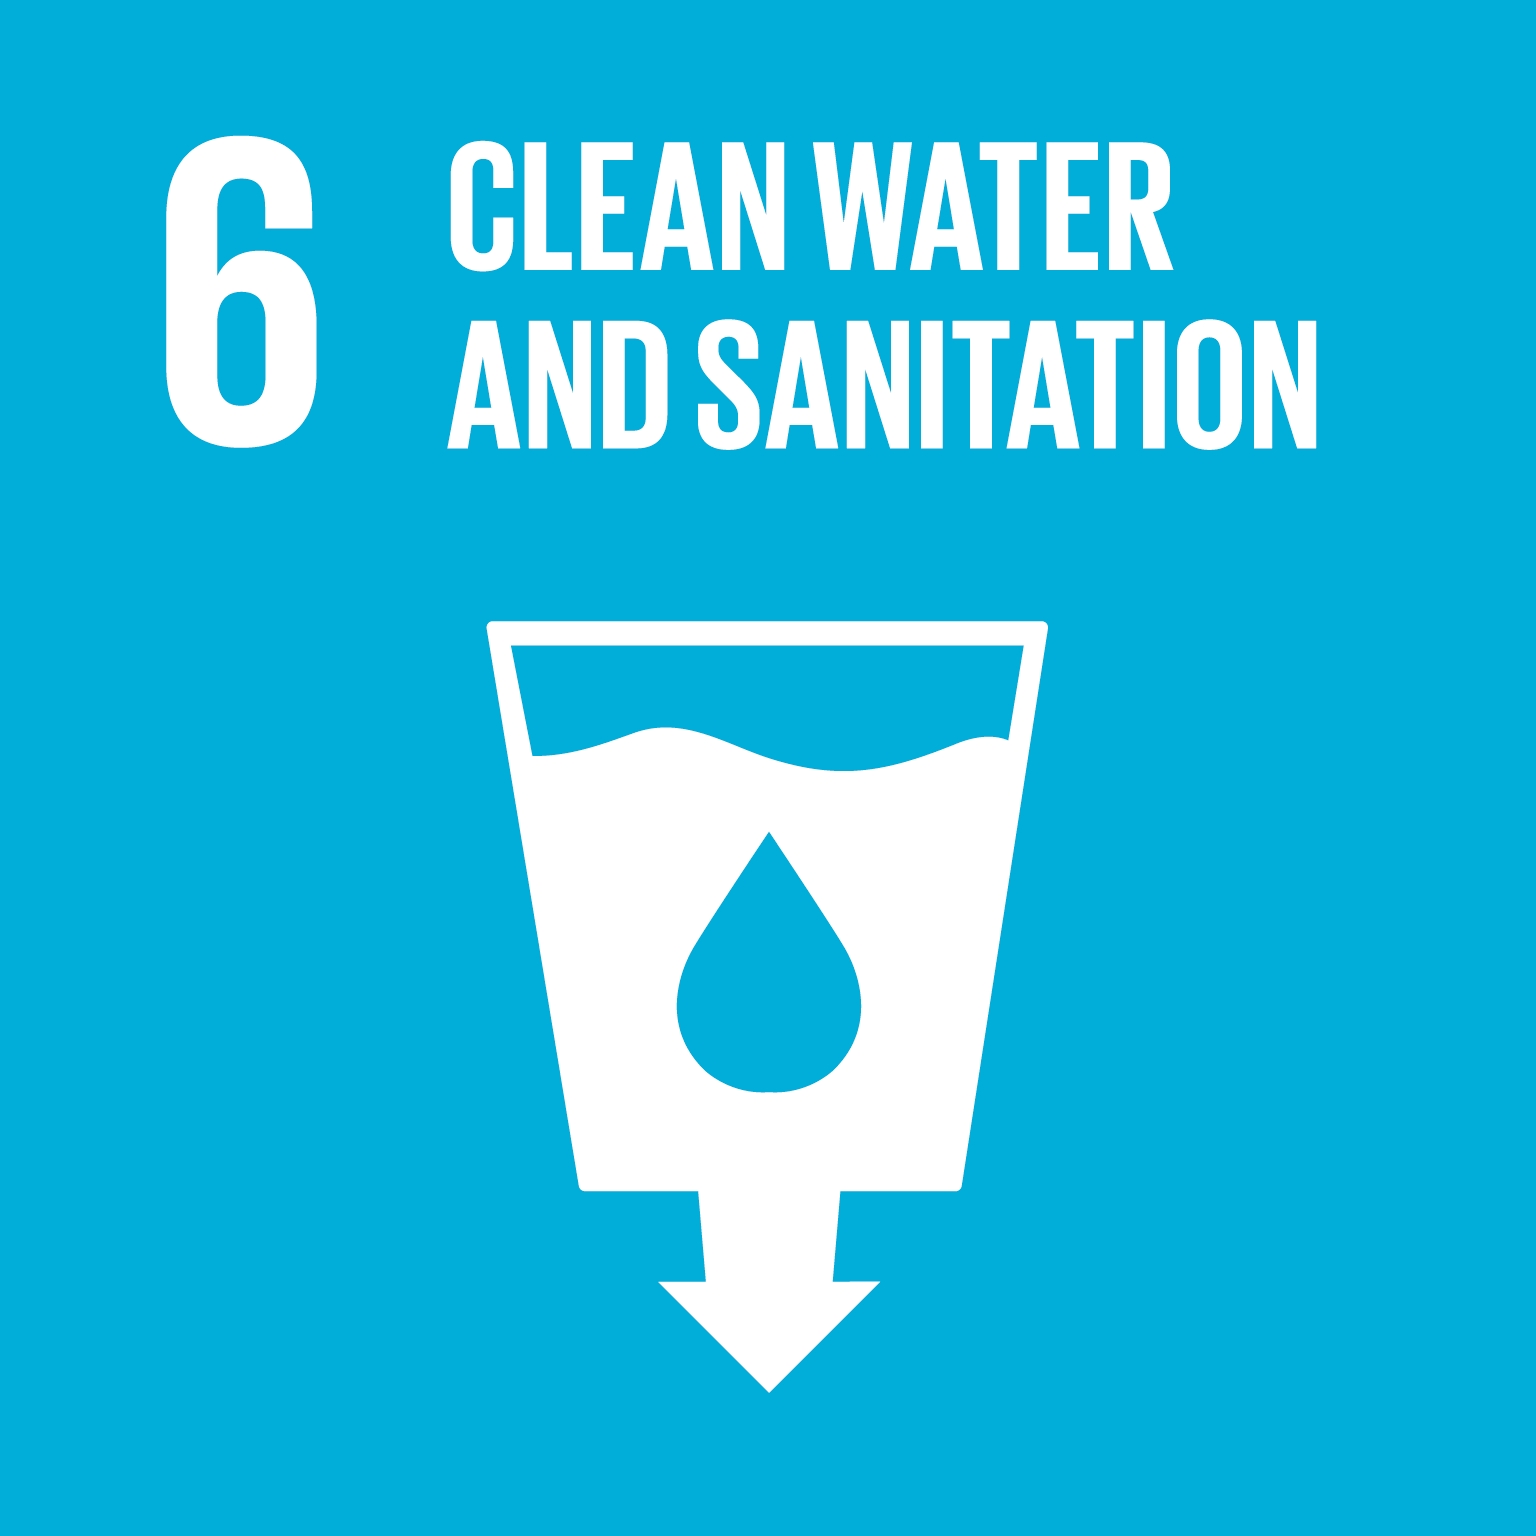 6 CLEN WATER AND SANITATION